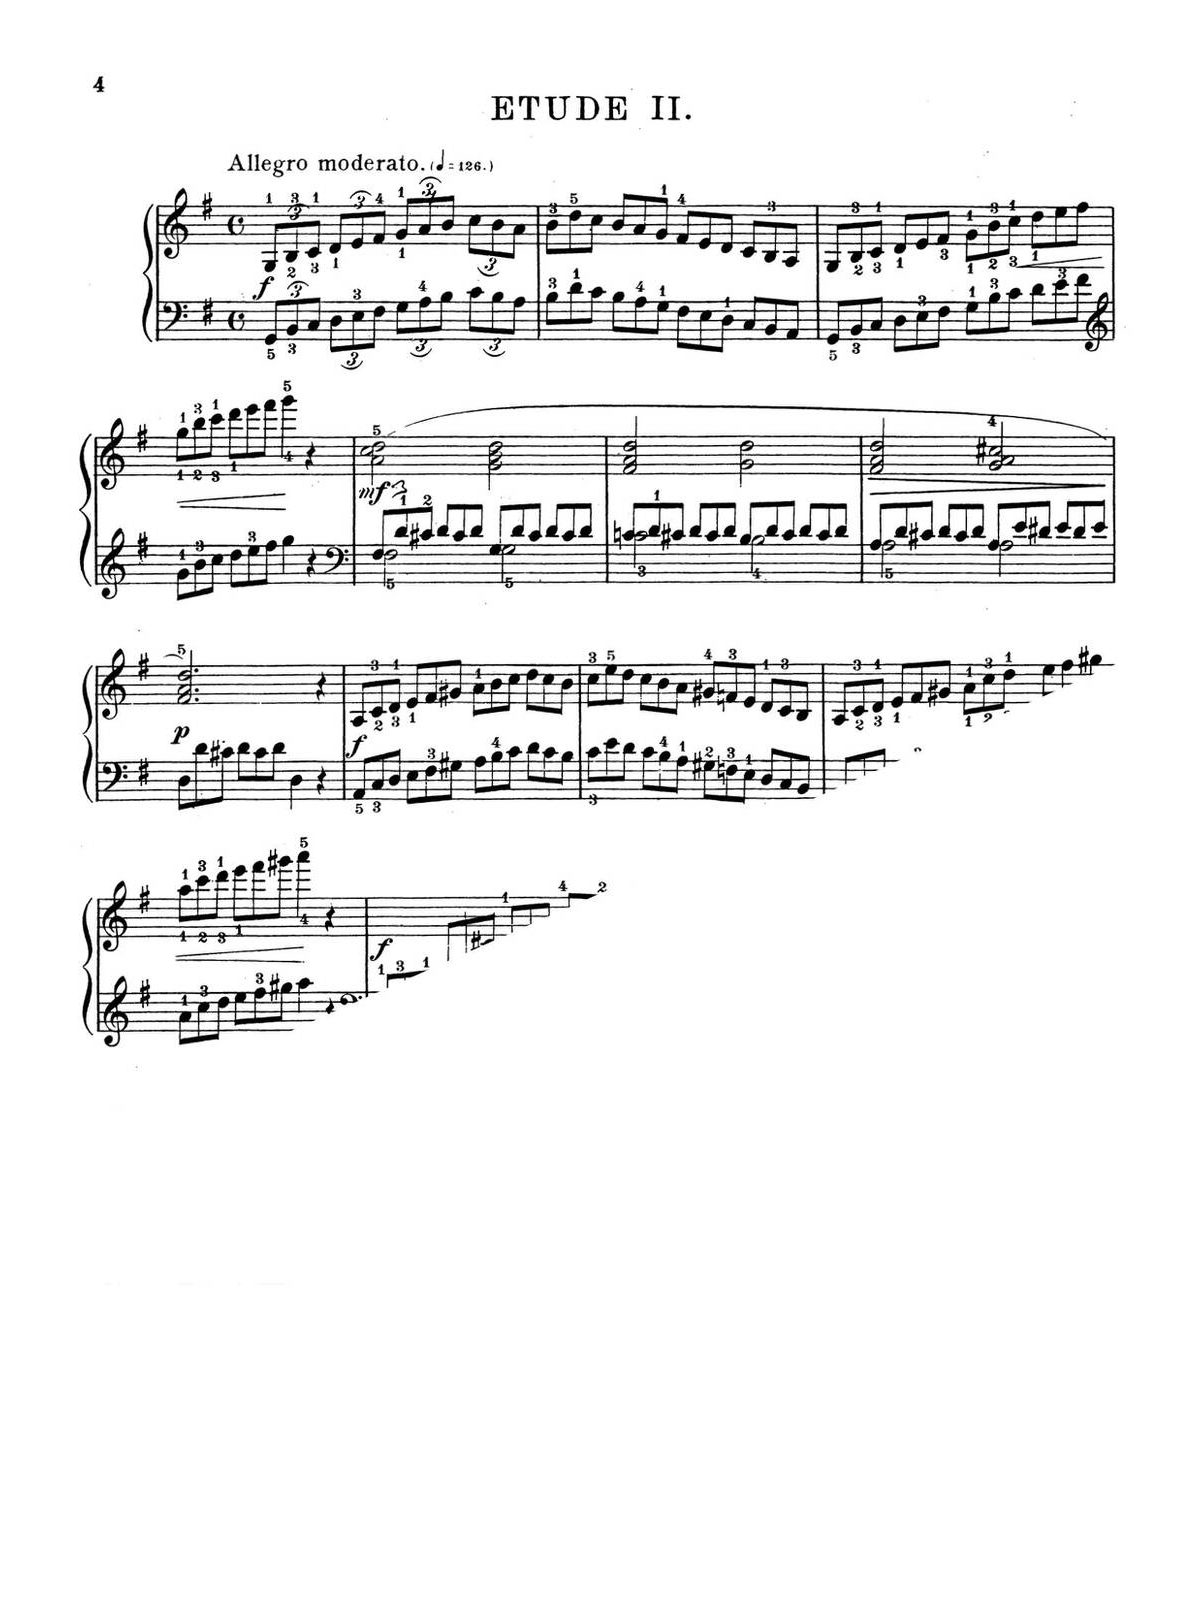 Bertini, 25 Easy Etudes Without Octaves for Piano, Op.100-p04